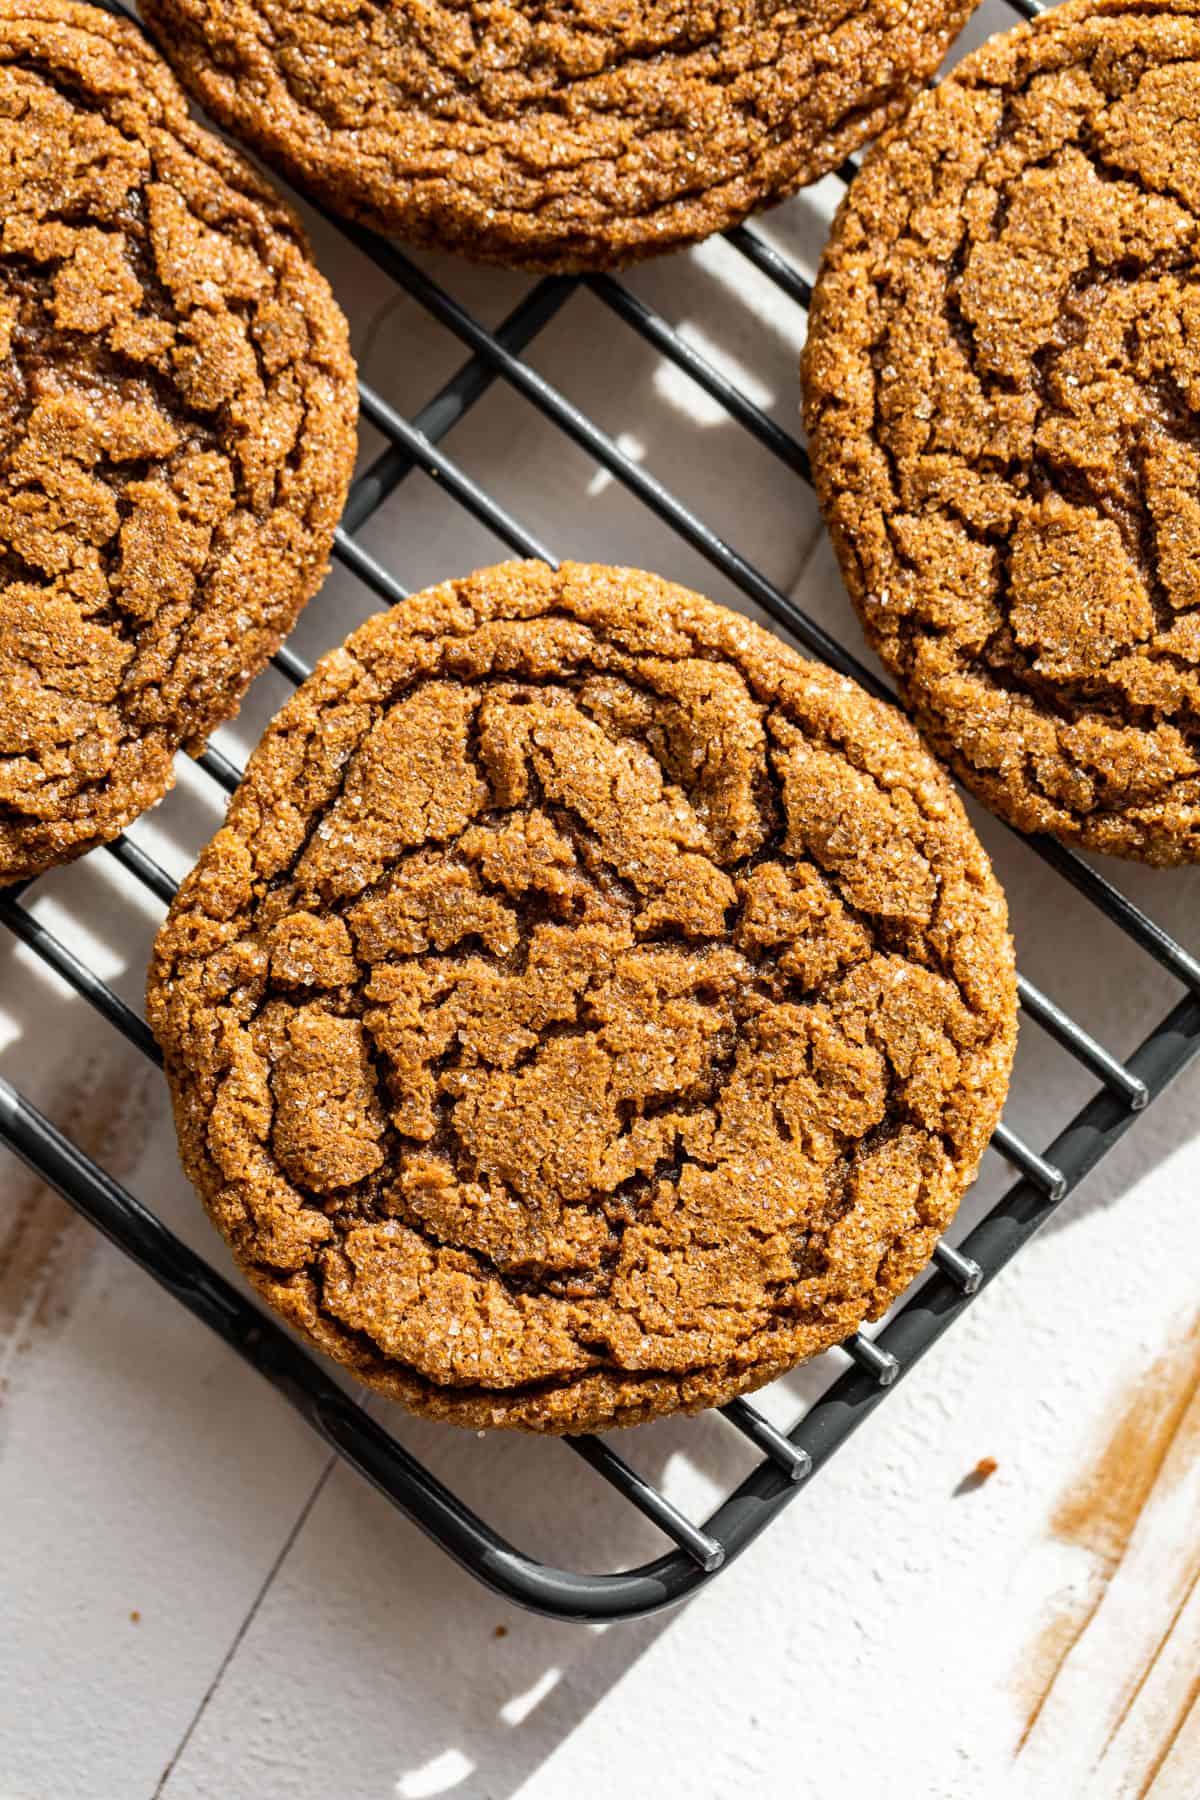 Downwards view of Molasses Ginger Cookies on a cooling rack.